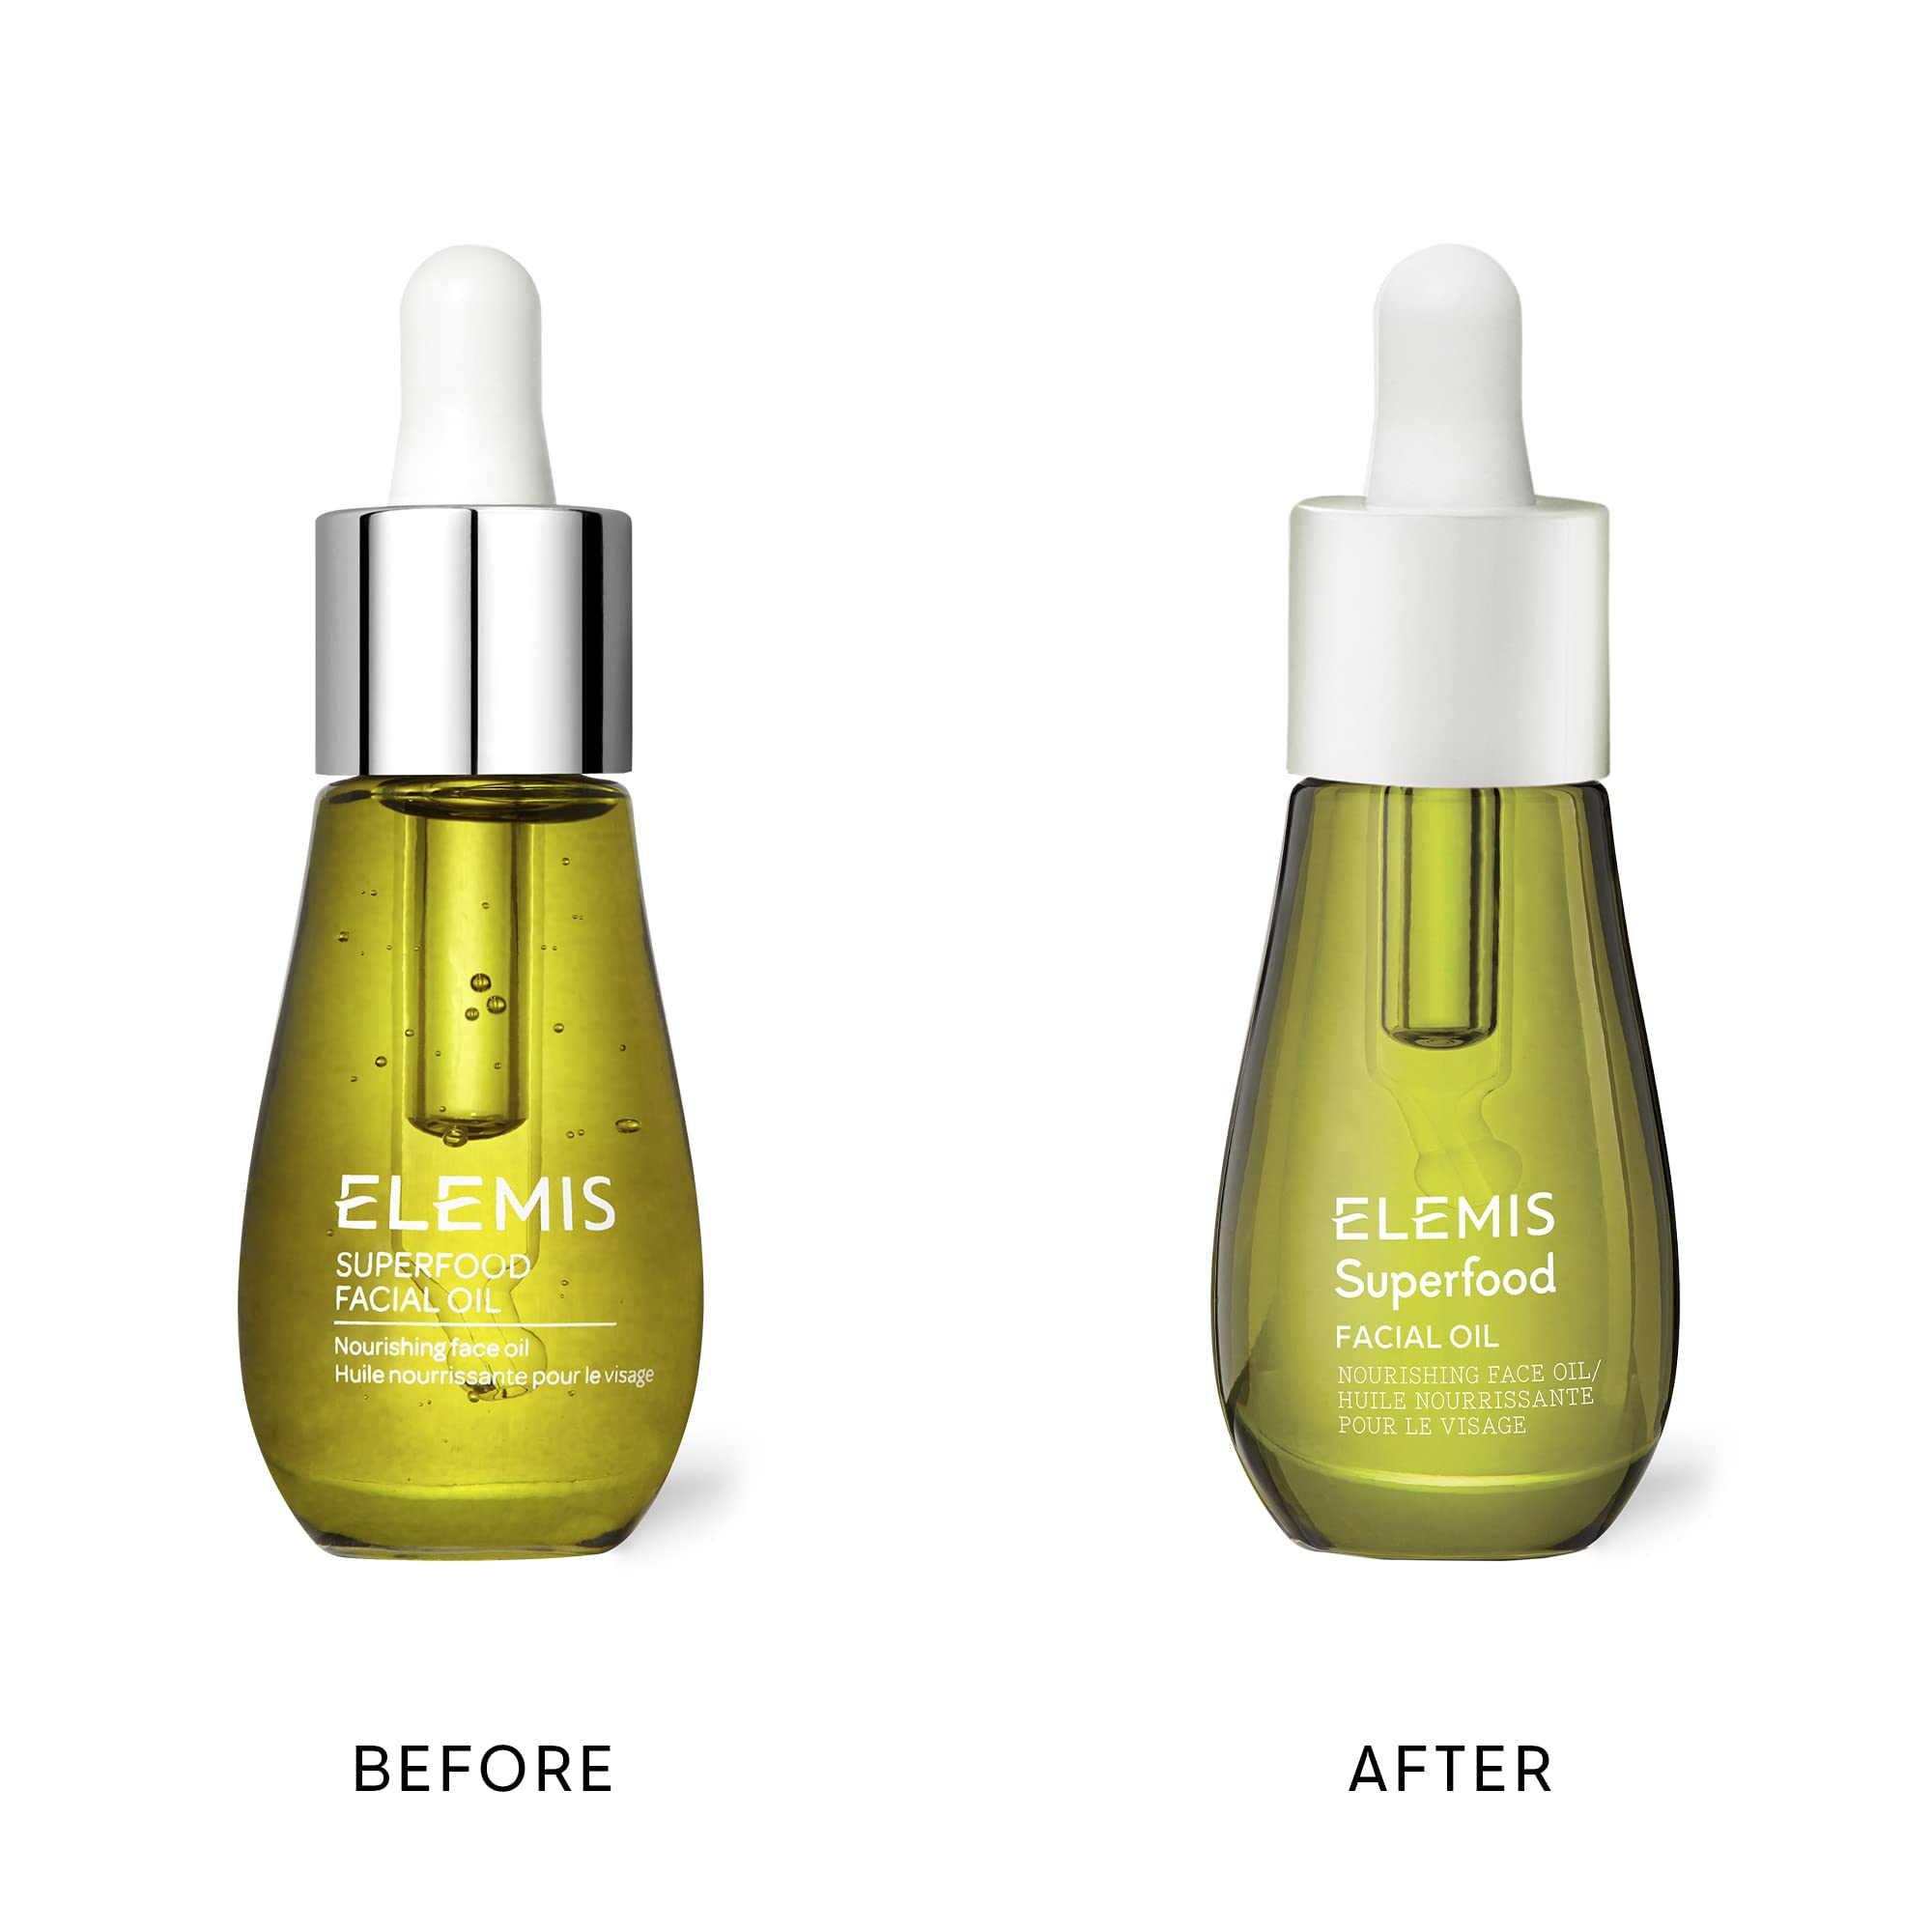 ELEMIS Superfood Facial Oil Concentrated Lightweight, Nourishing Daily Face Oil Hydrates and Smooths Skin